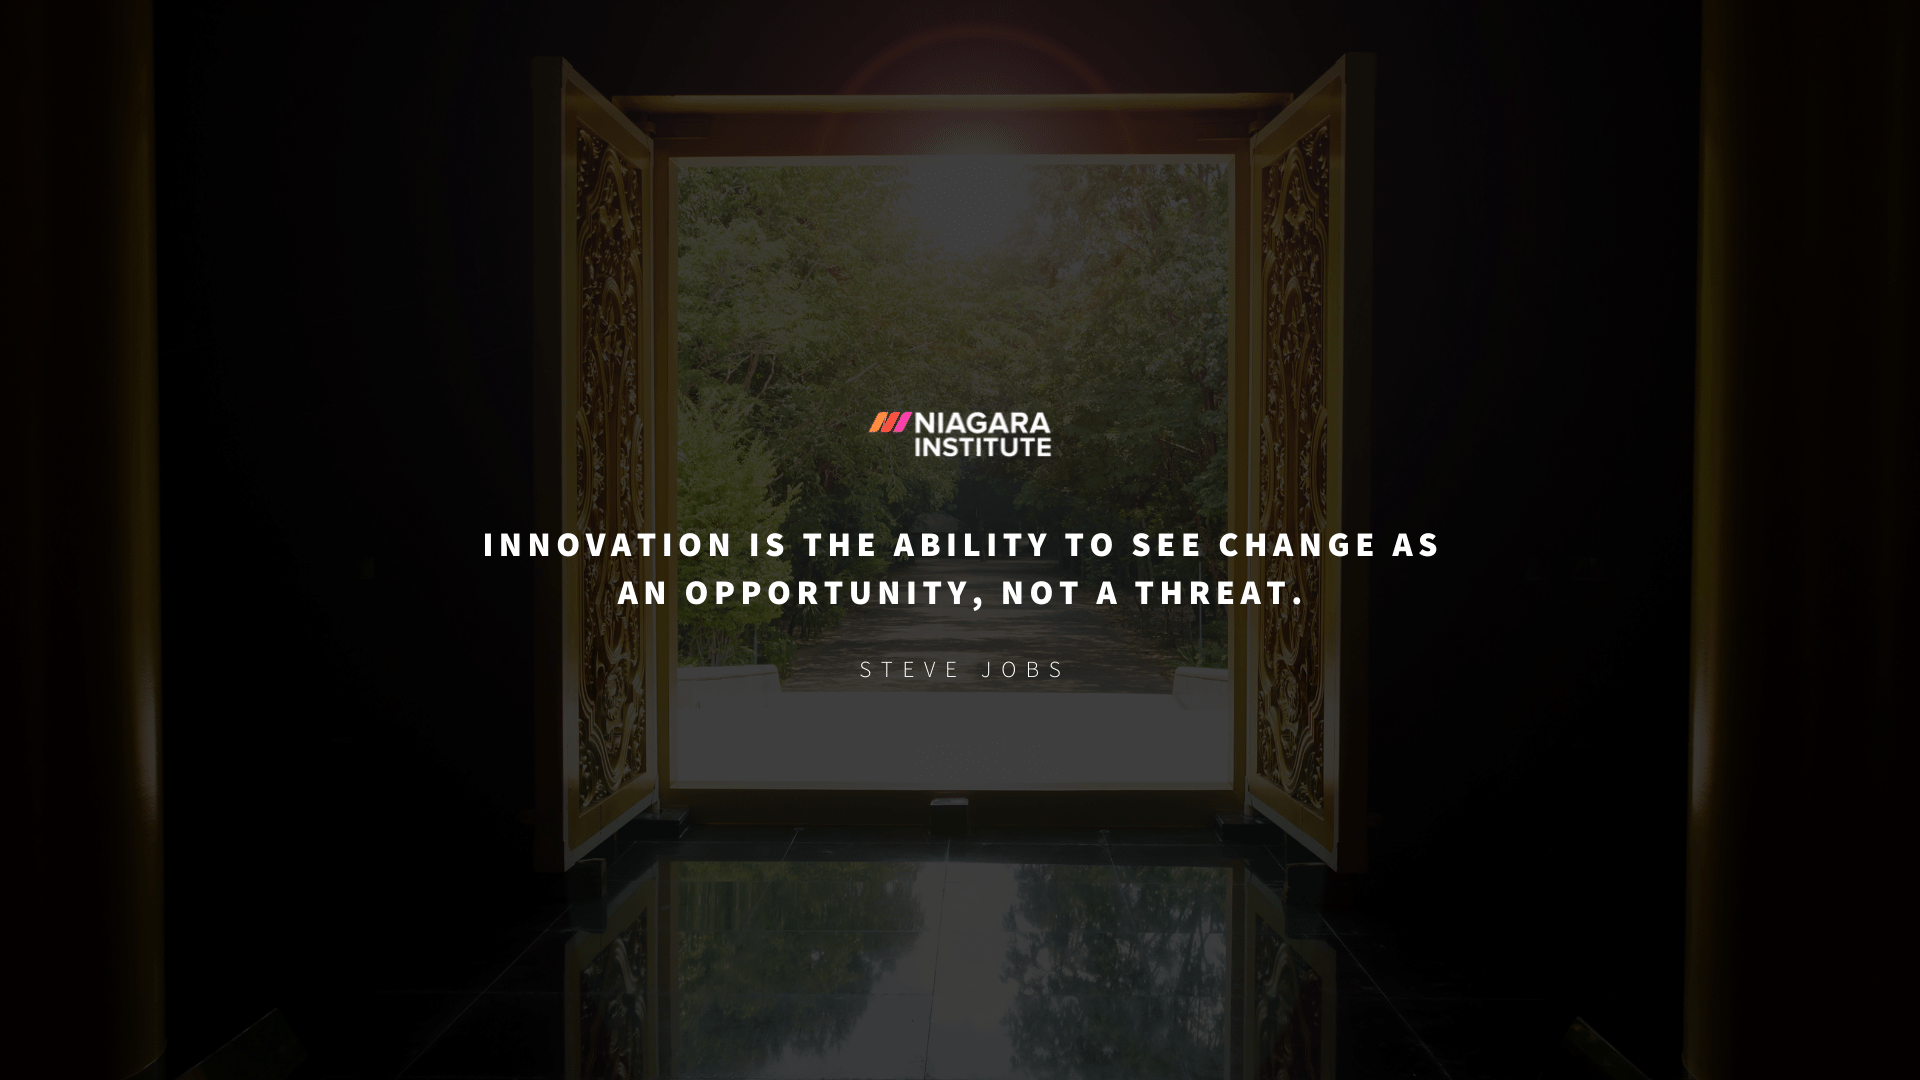 Innovation is the ability to see change as an opportunity, not a threat - Steve Jobs Motivational Quote for Employees